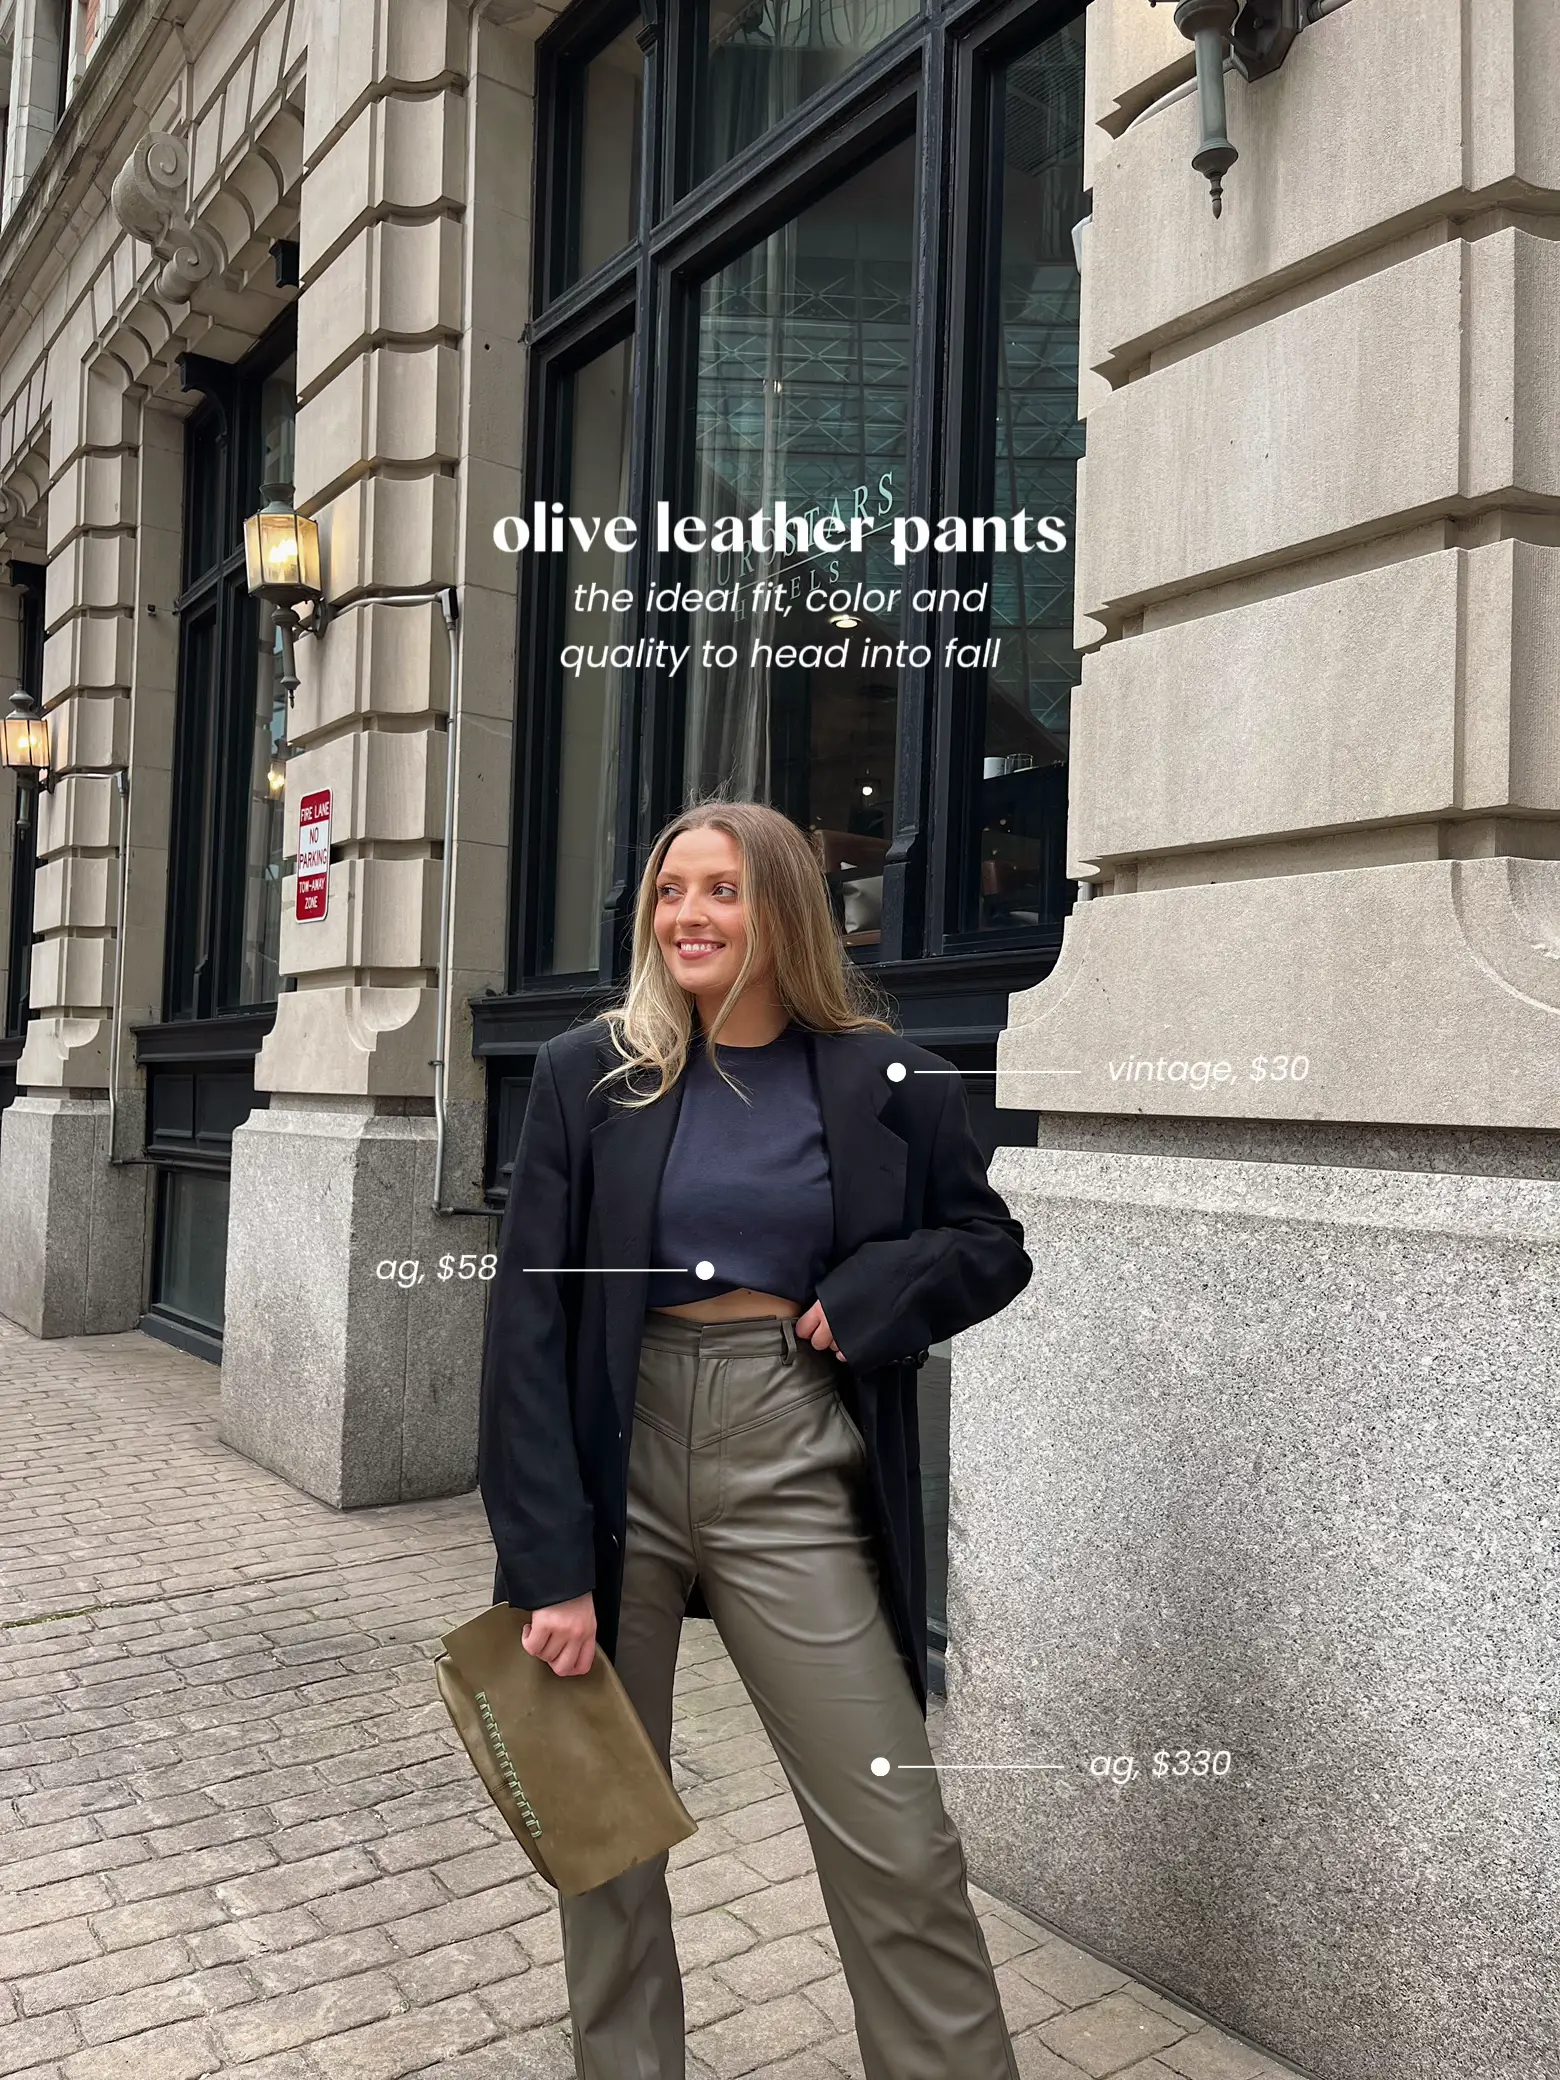 how to: styling leather pants, Gallery posted by afternoon, sj